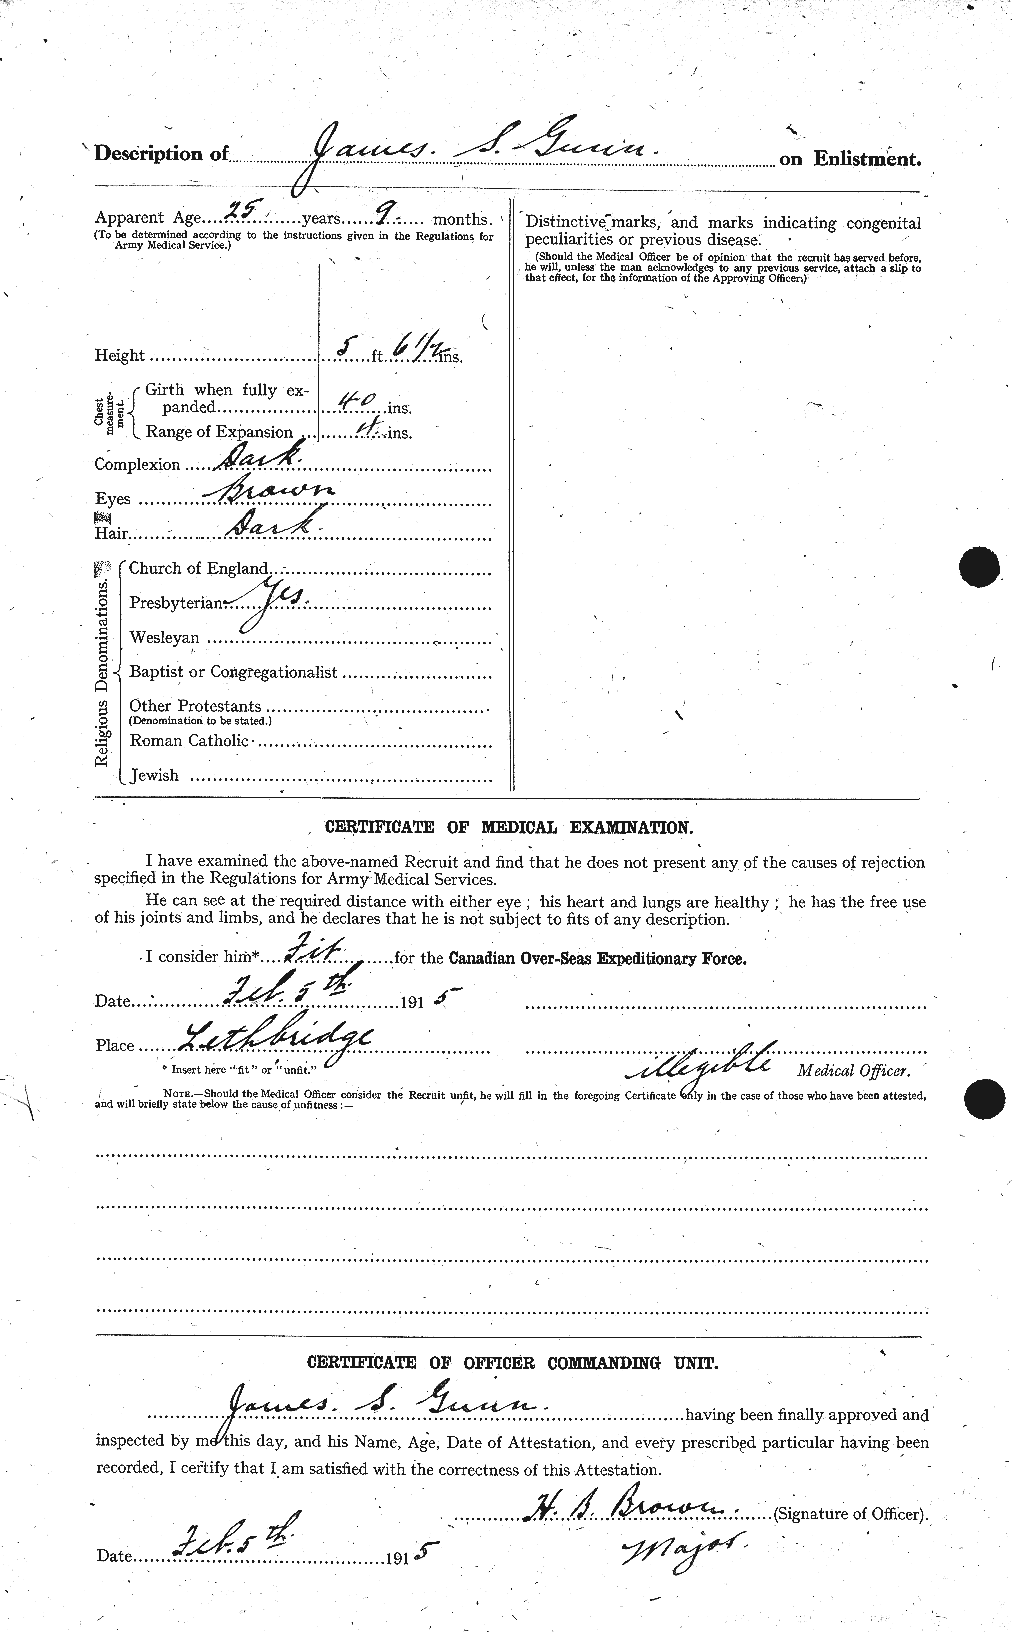 Personnel Records of the First World War - CEF 369278b